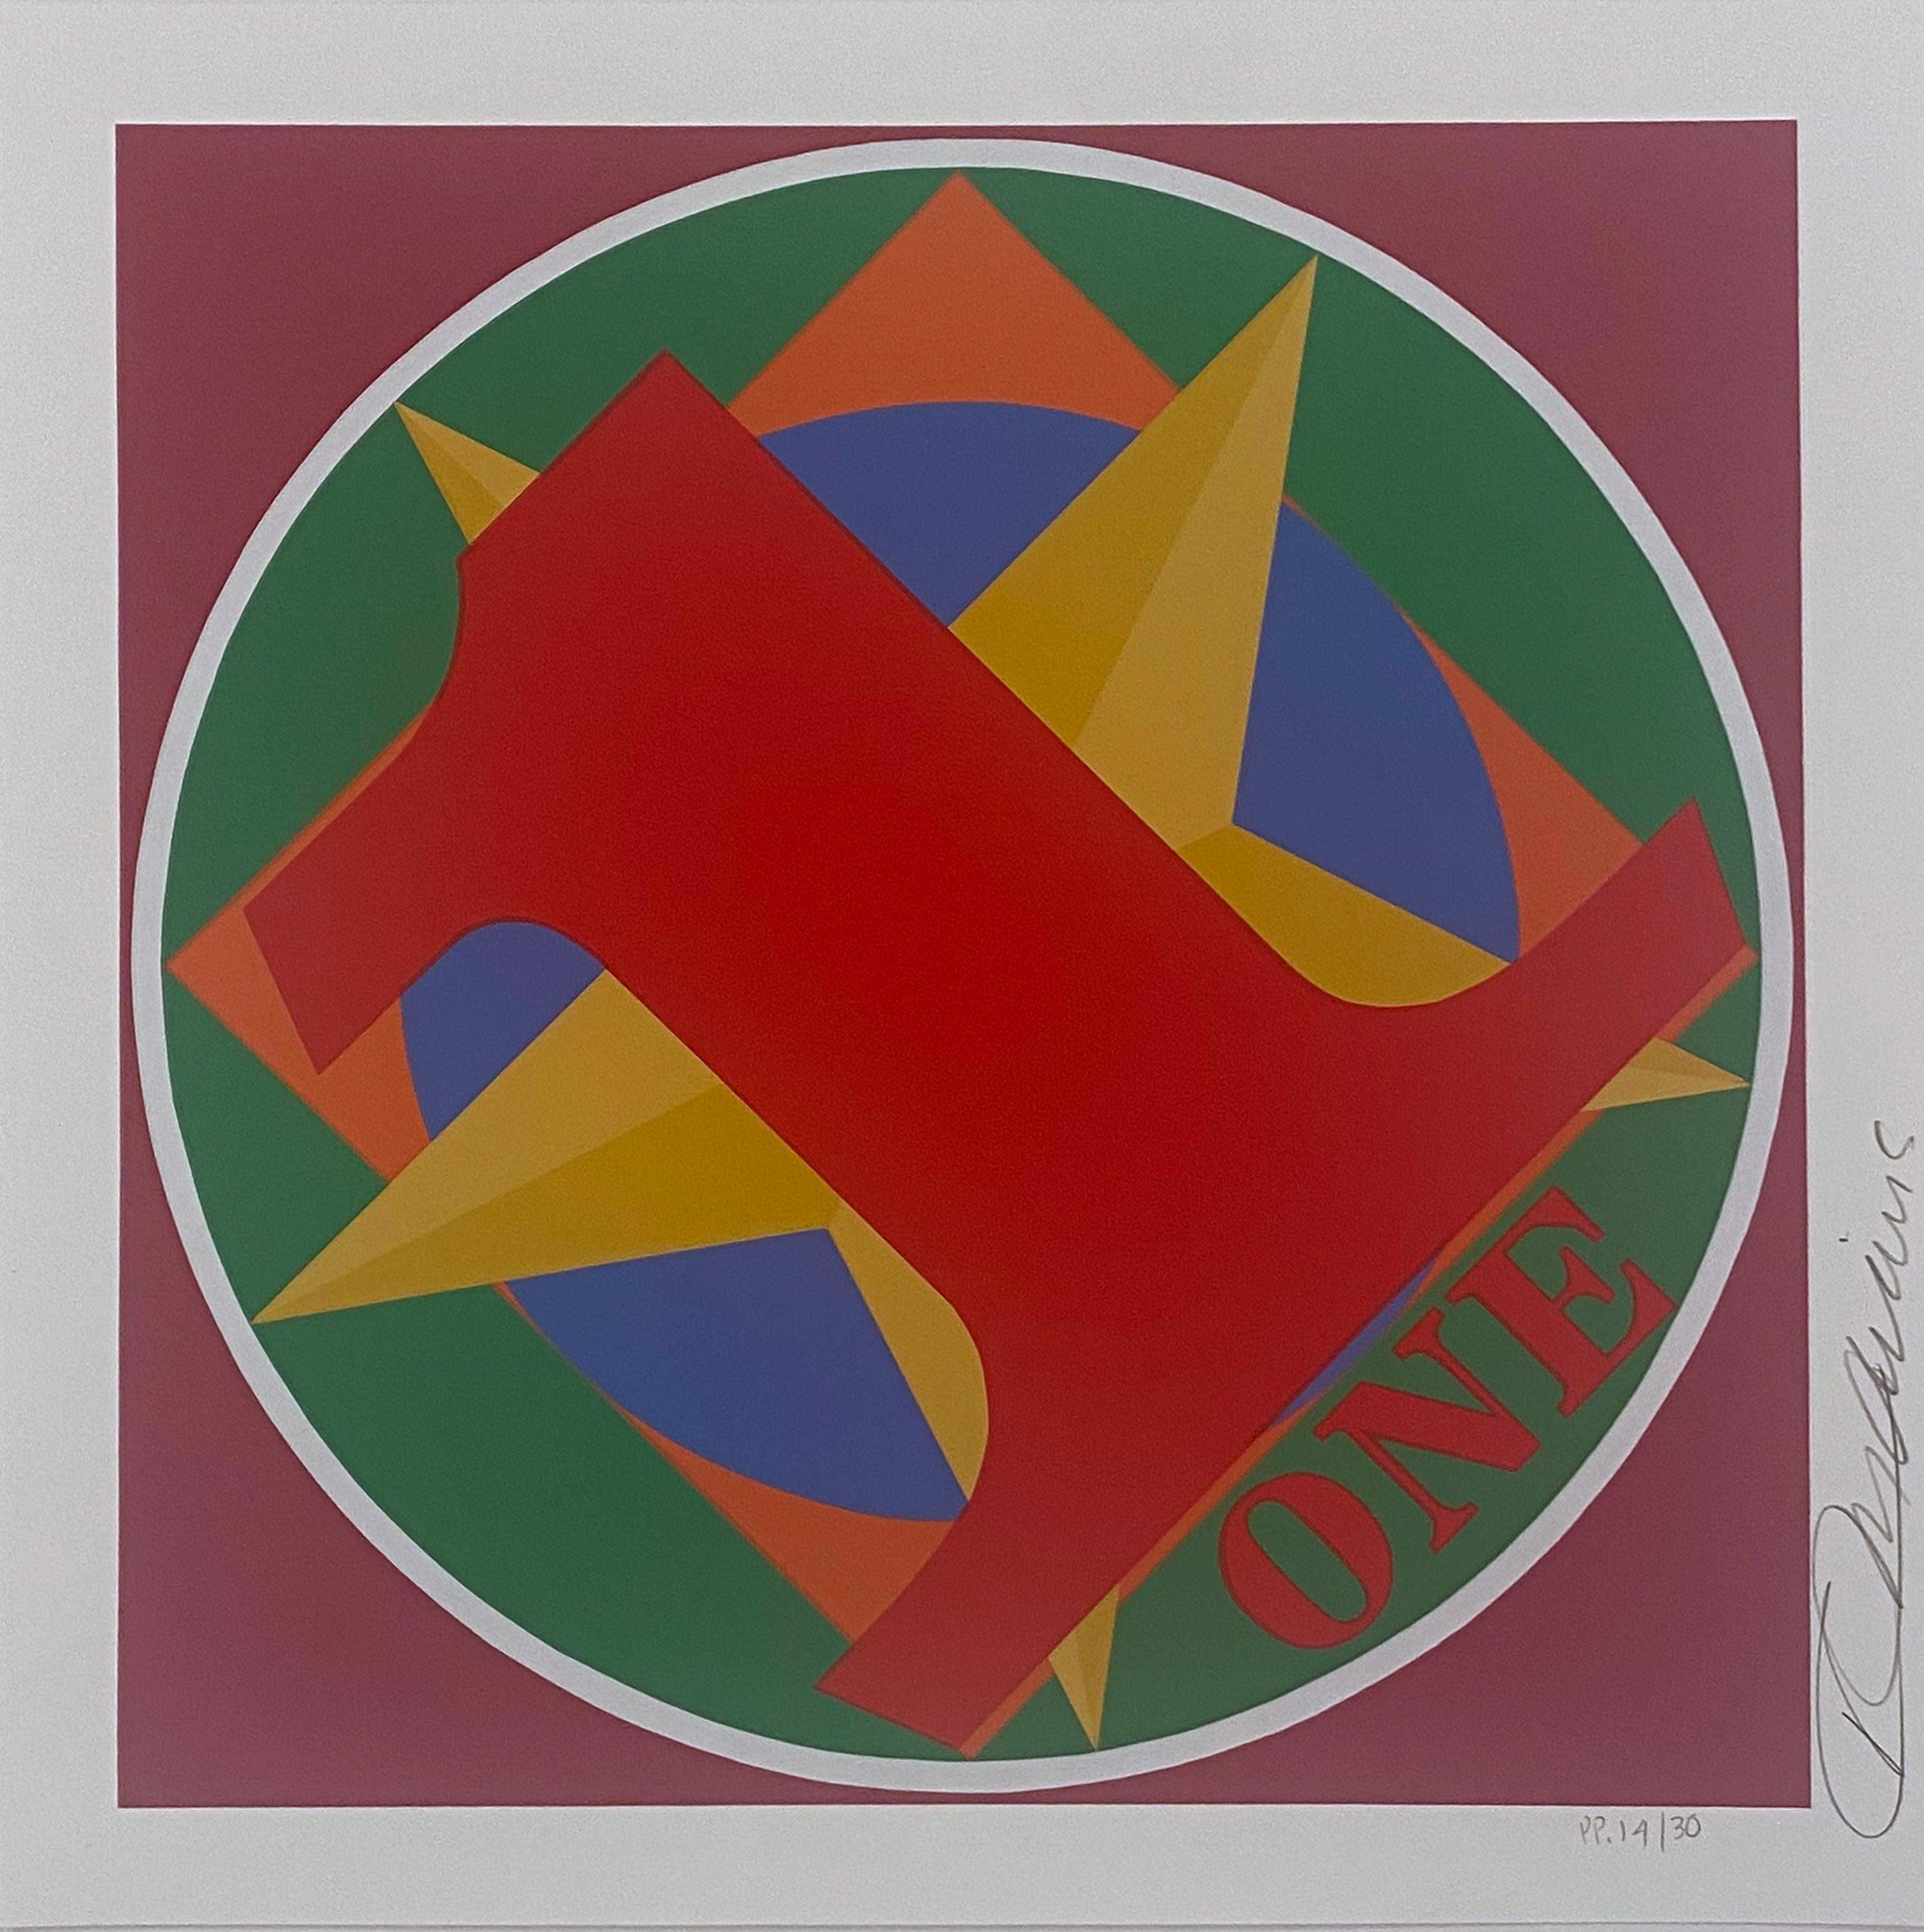 Robert Indiana Set of 6 Signed Serigraphs from The American Dream Portfolio 2